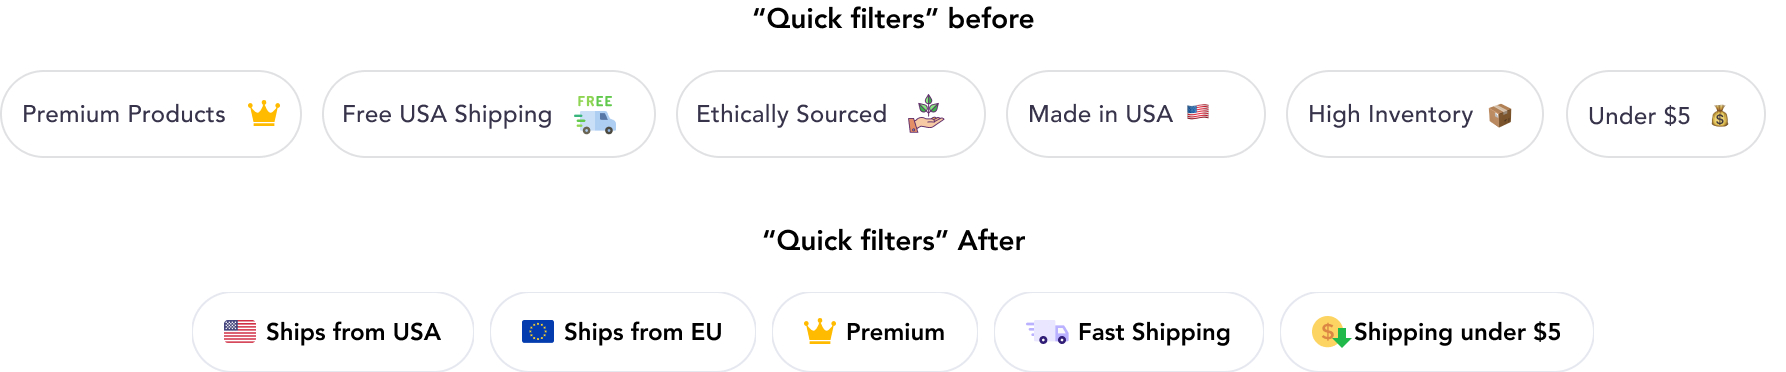 Quick filters before/after